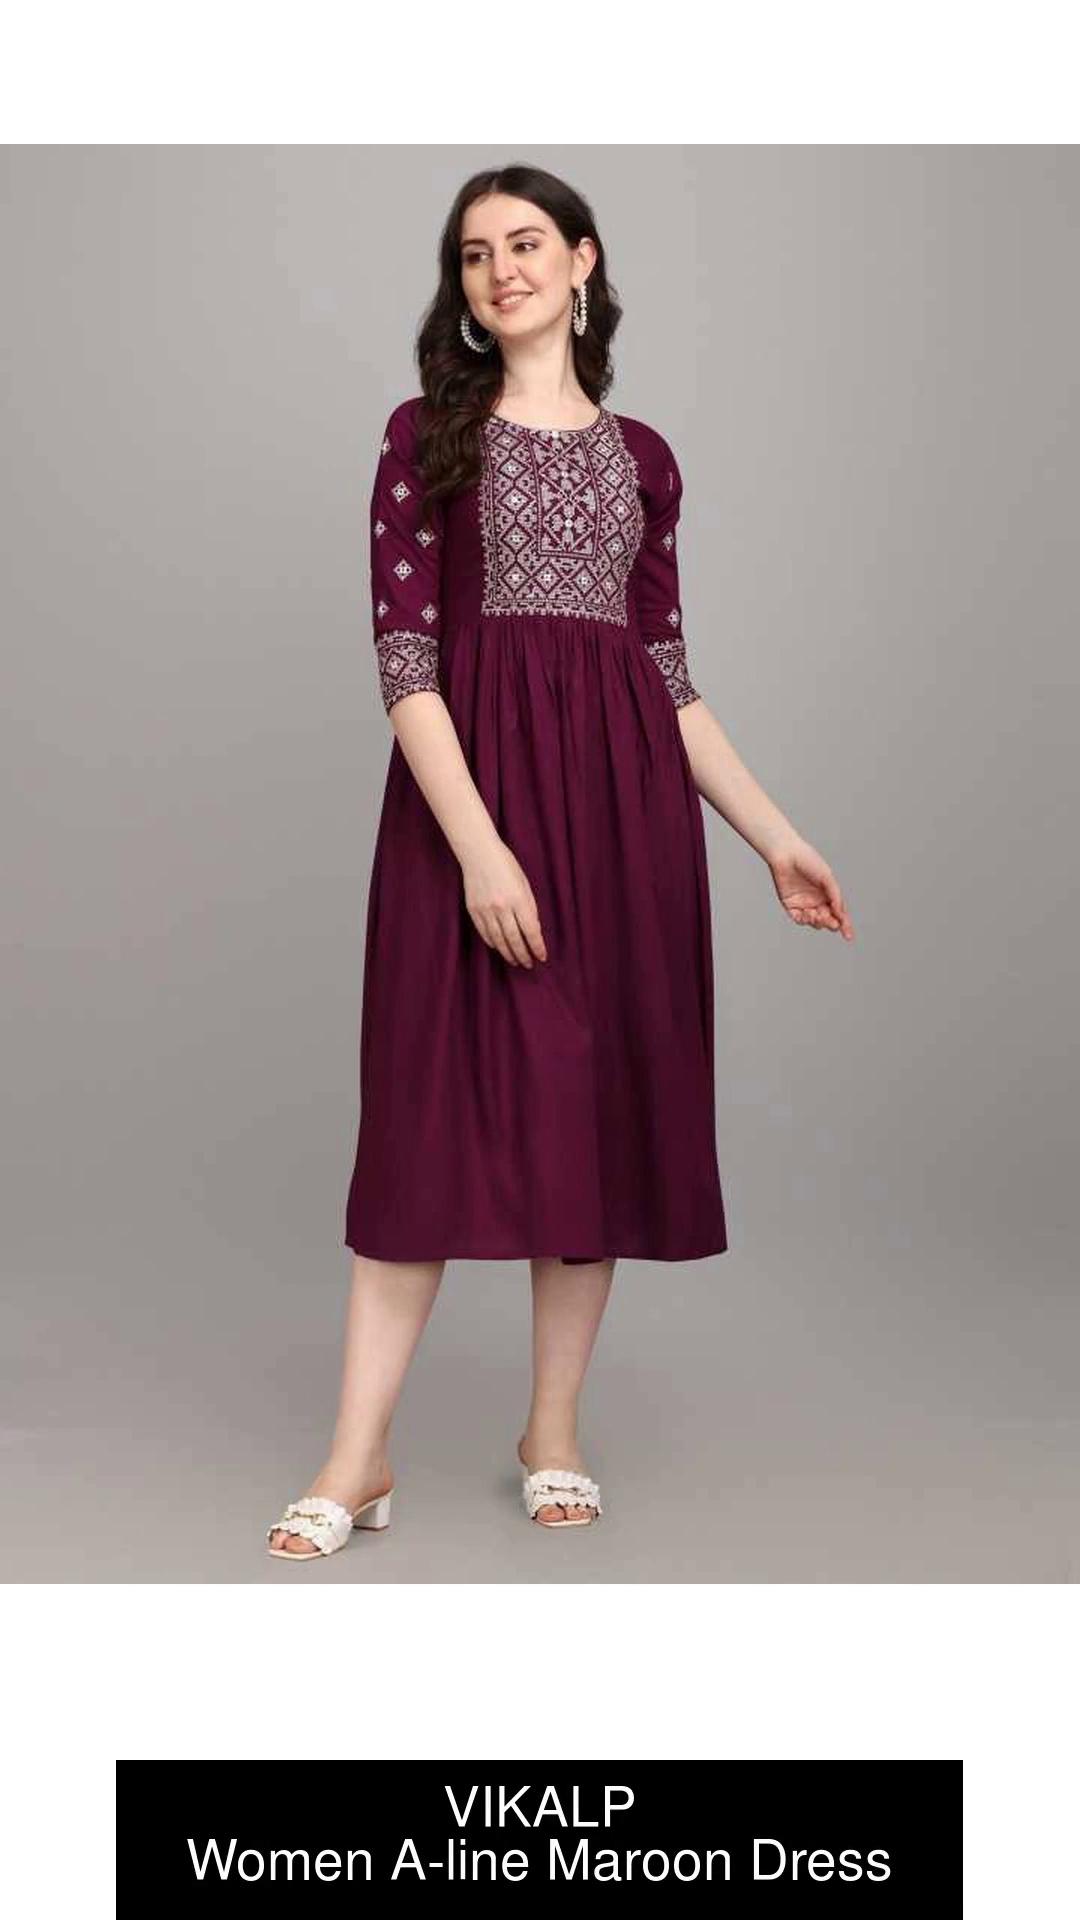 Anouk - By Myntra Indian Women Daily Wear Maroon Floral Embroidered A-Line  Round Neck Knee Length Three-Quarter Sleeves Polyester Kurta Ready To Wear  Dress - Walmart.com